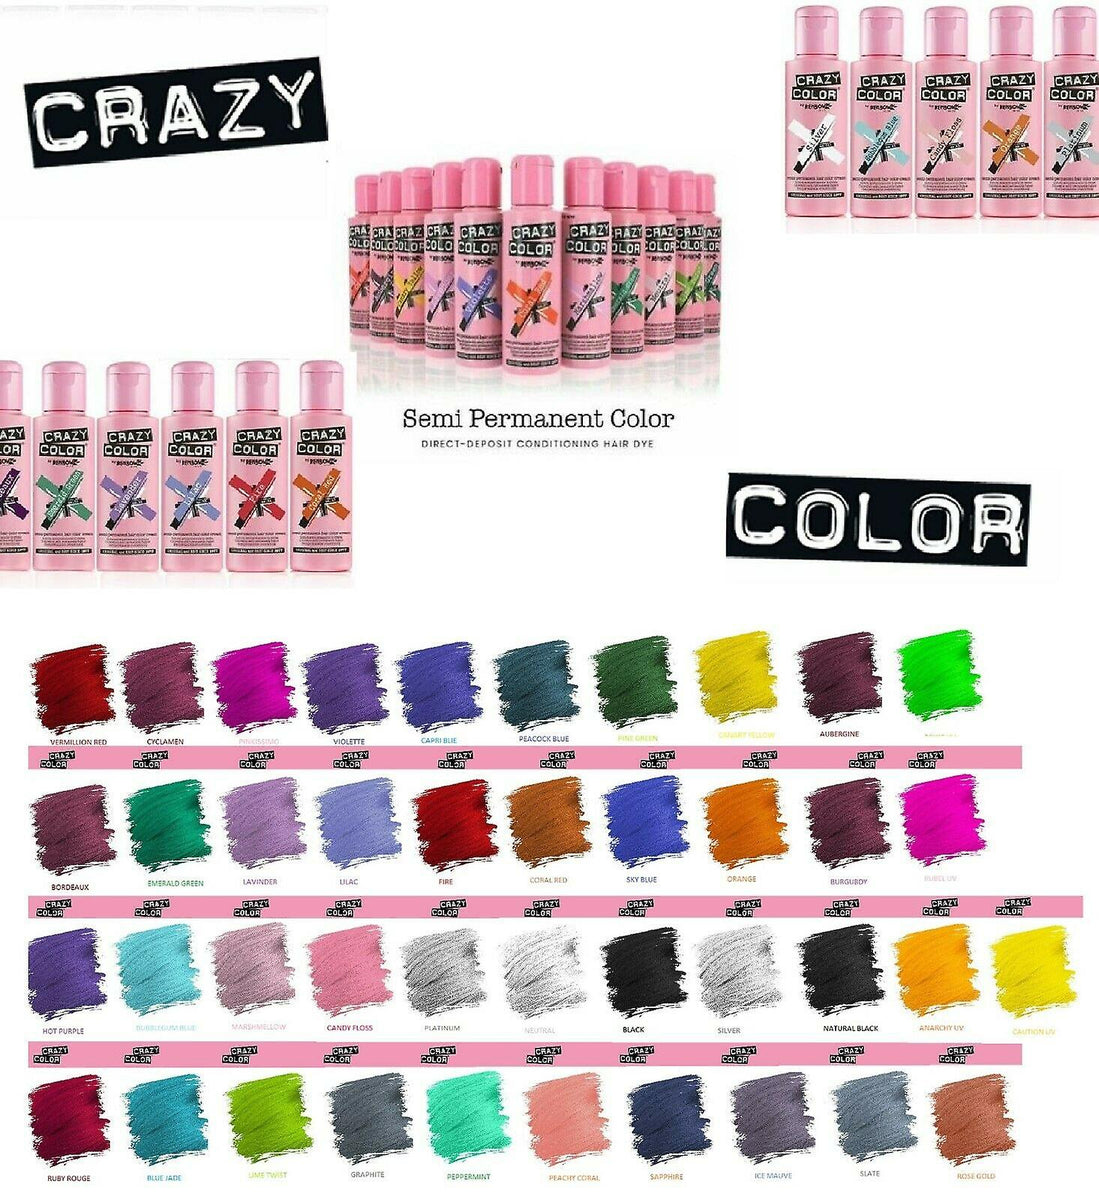 Renbow Crazy Color 100ml